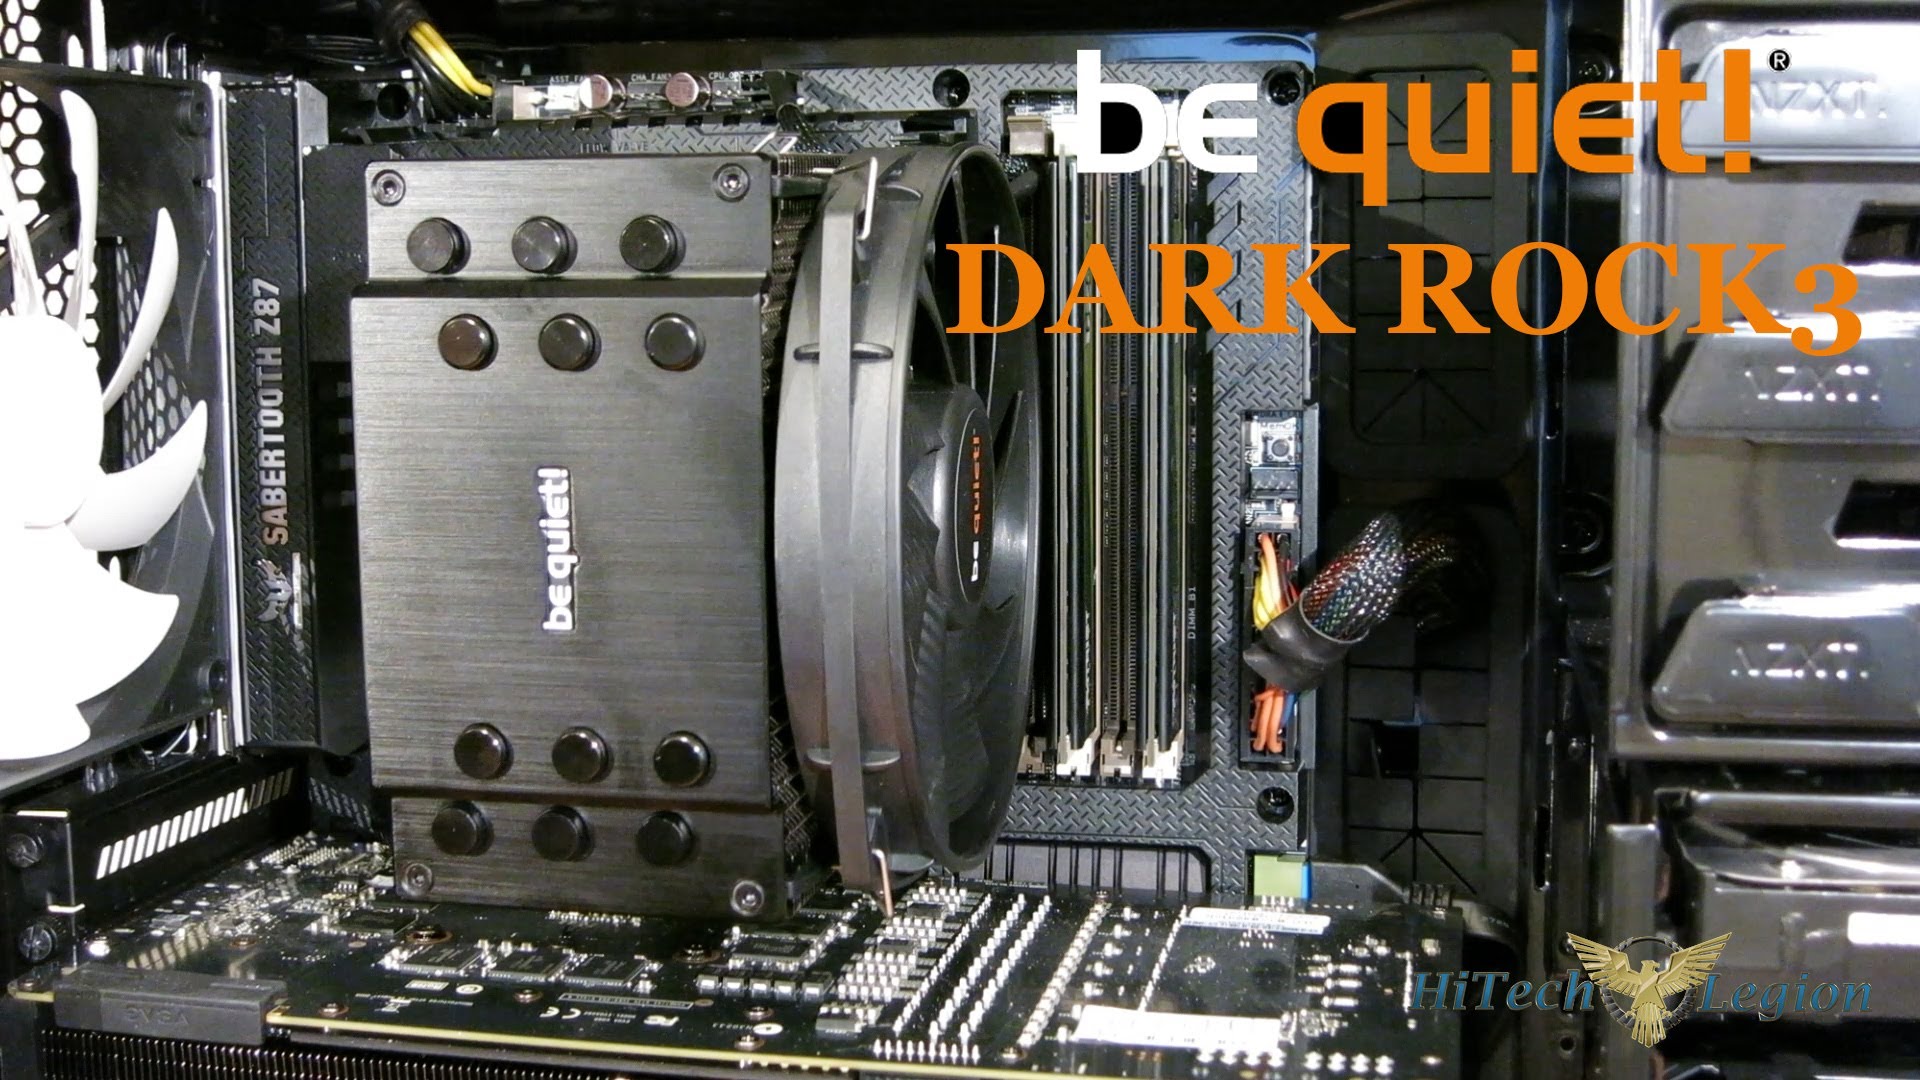 be quiet! Dark Rock 3 CPU Cooler Overview and Benchmarks - YouTube